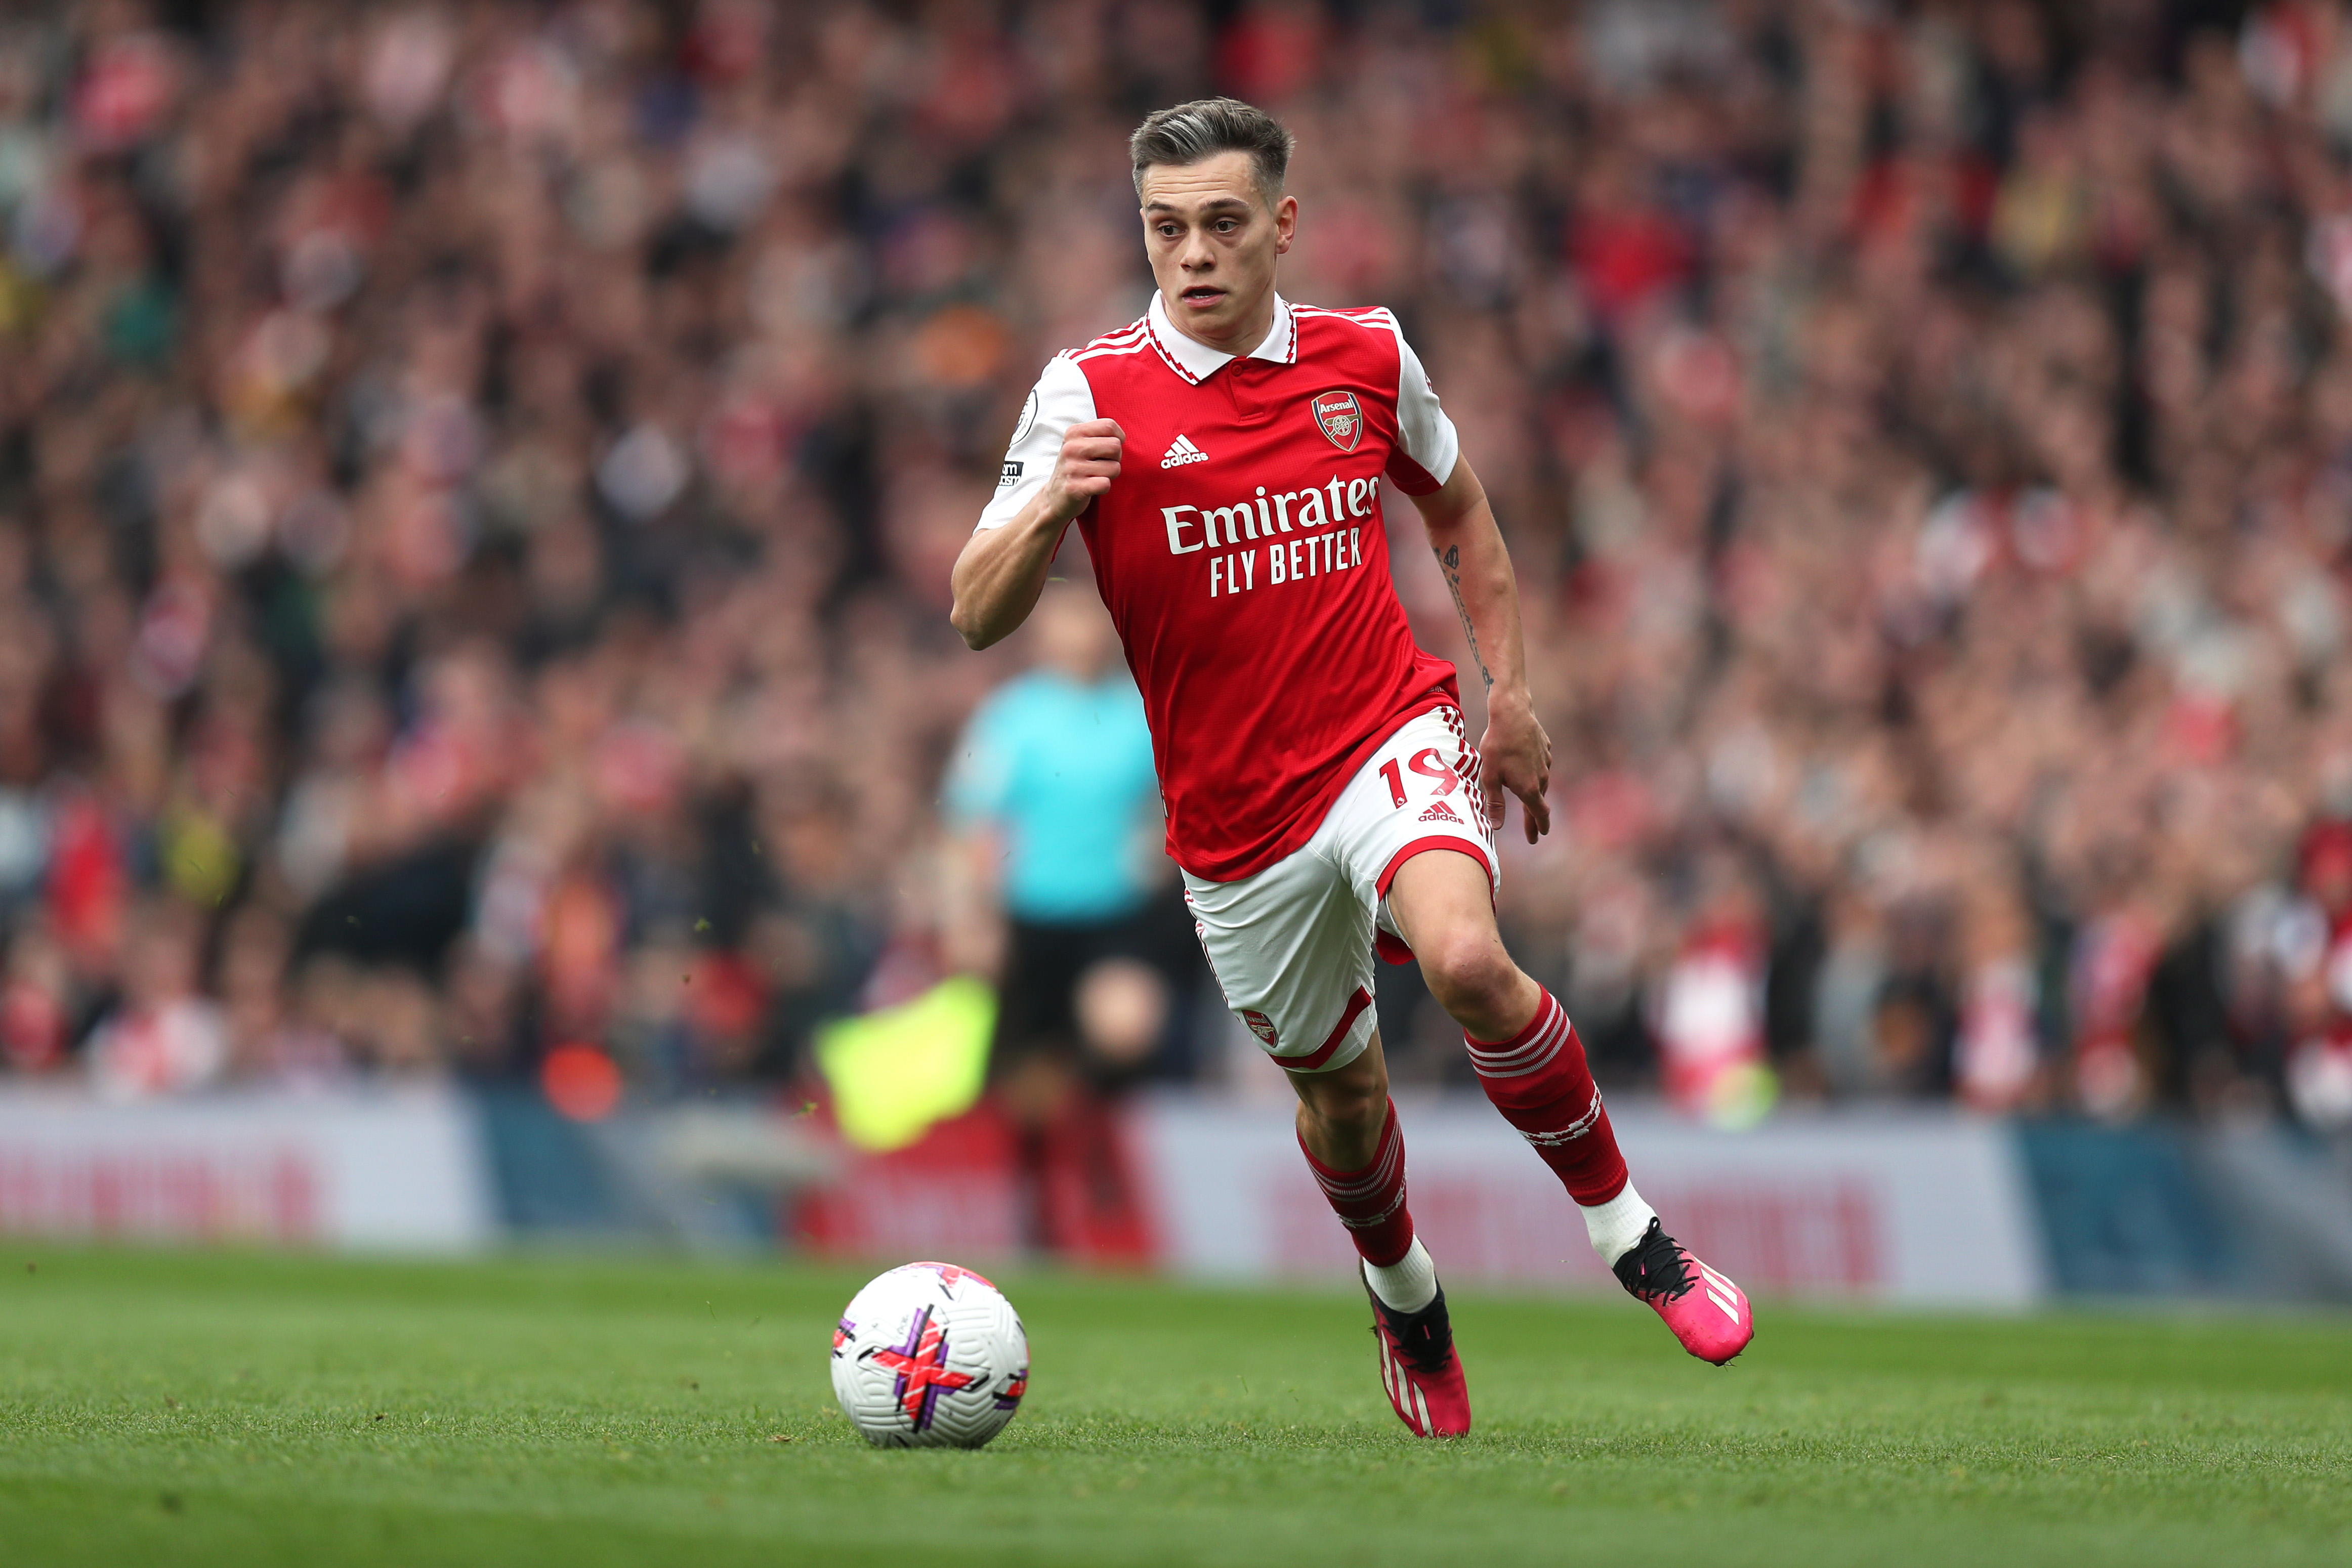 Leandro Trossard lifts the lid on life at Arsenal and the title race